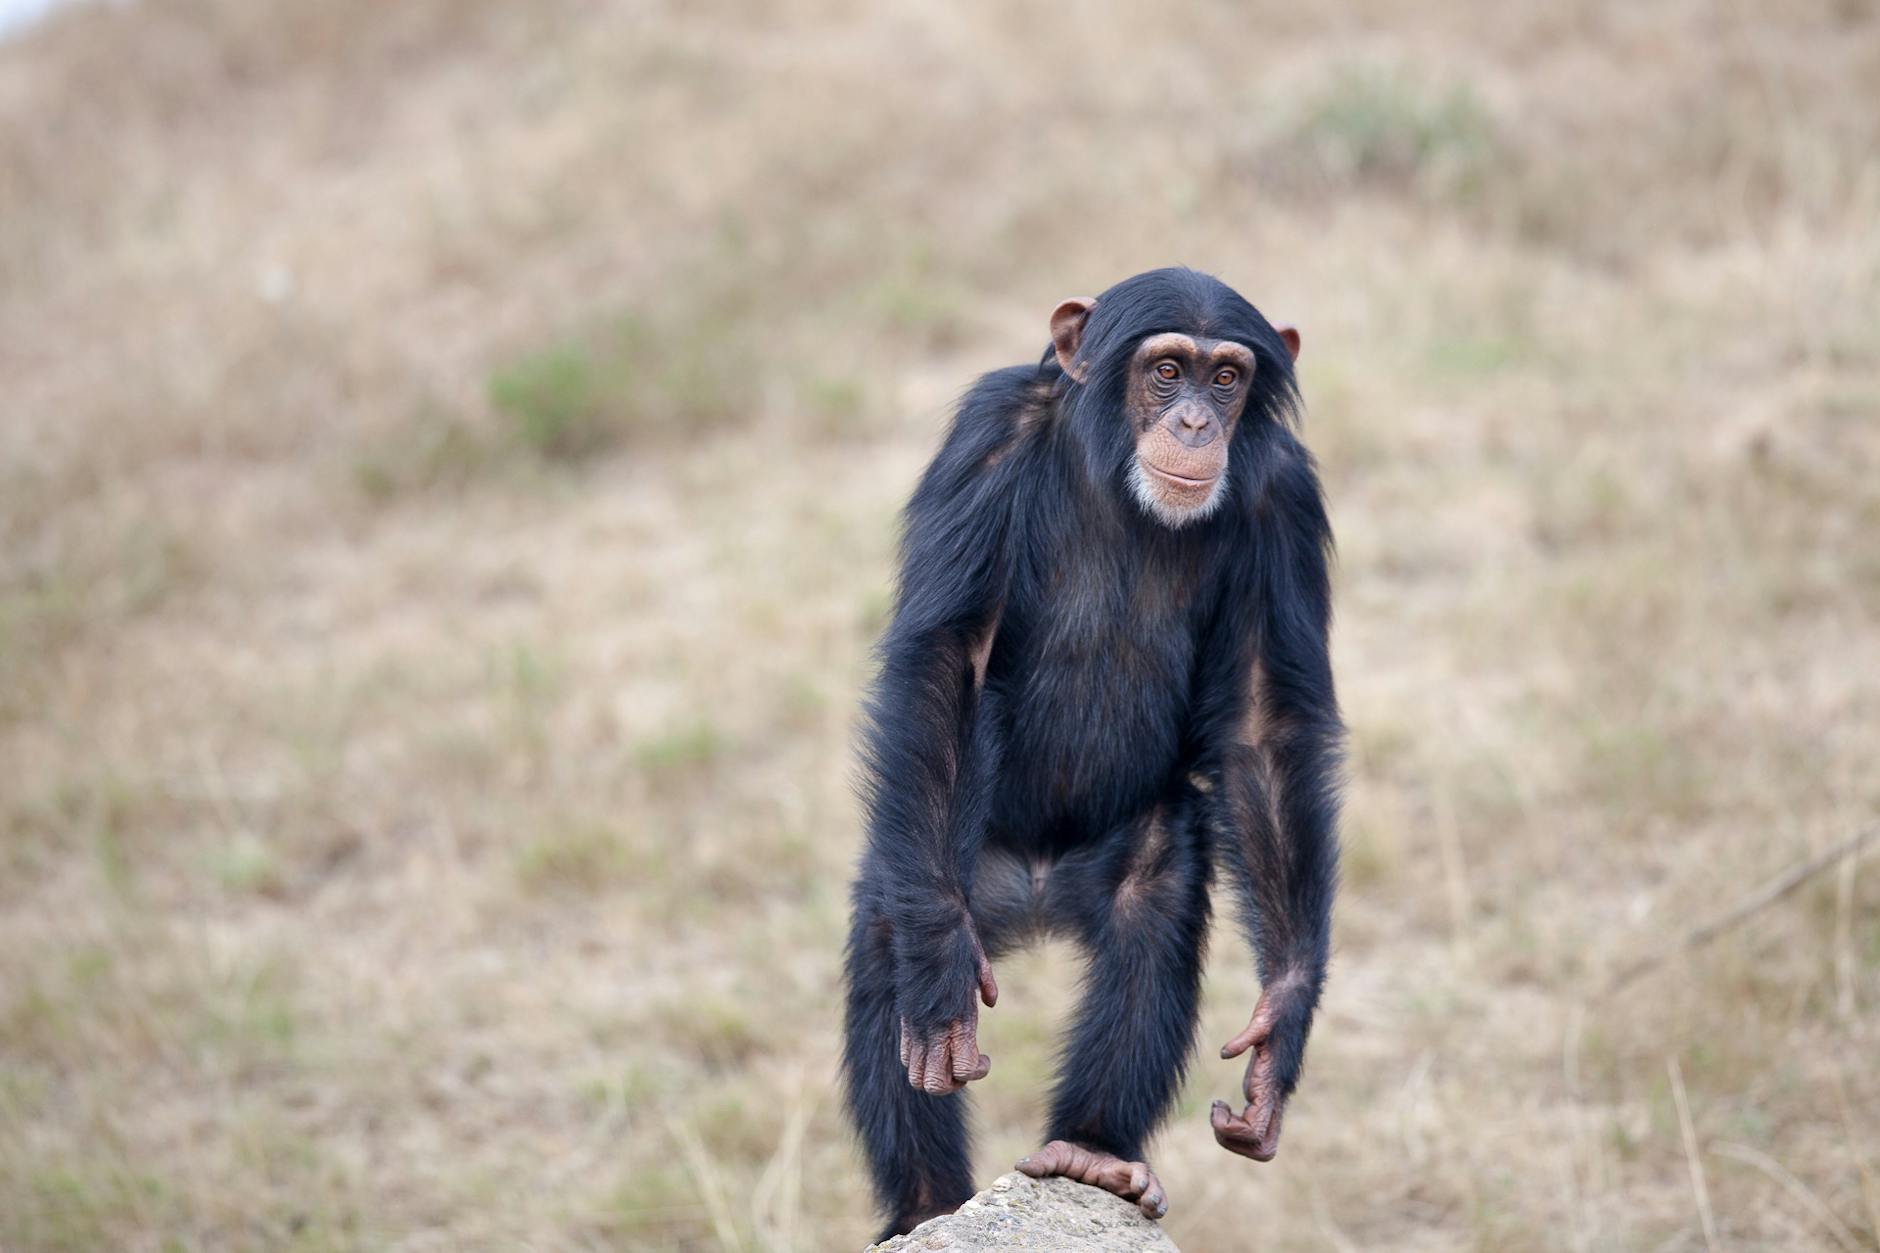 Standing Black and Brown Primate Surrounded by Green Grass Fields